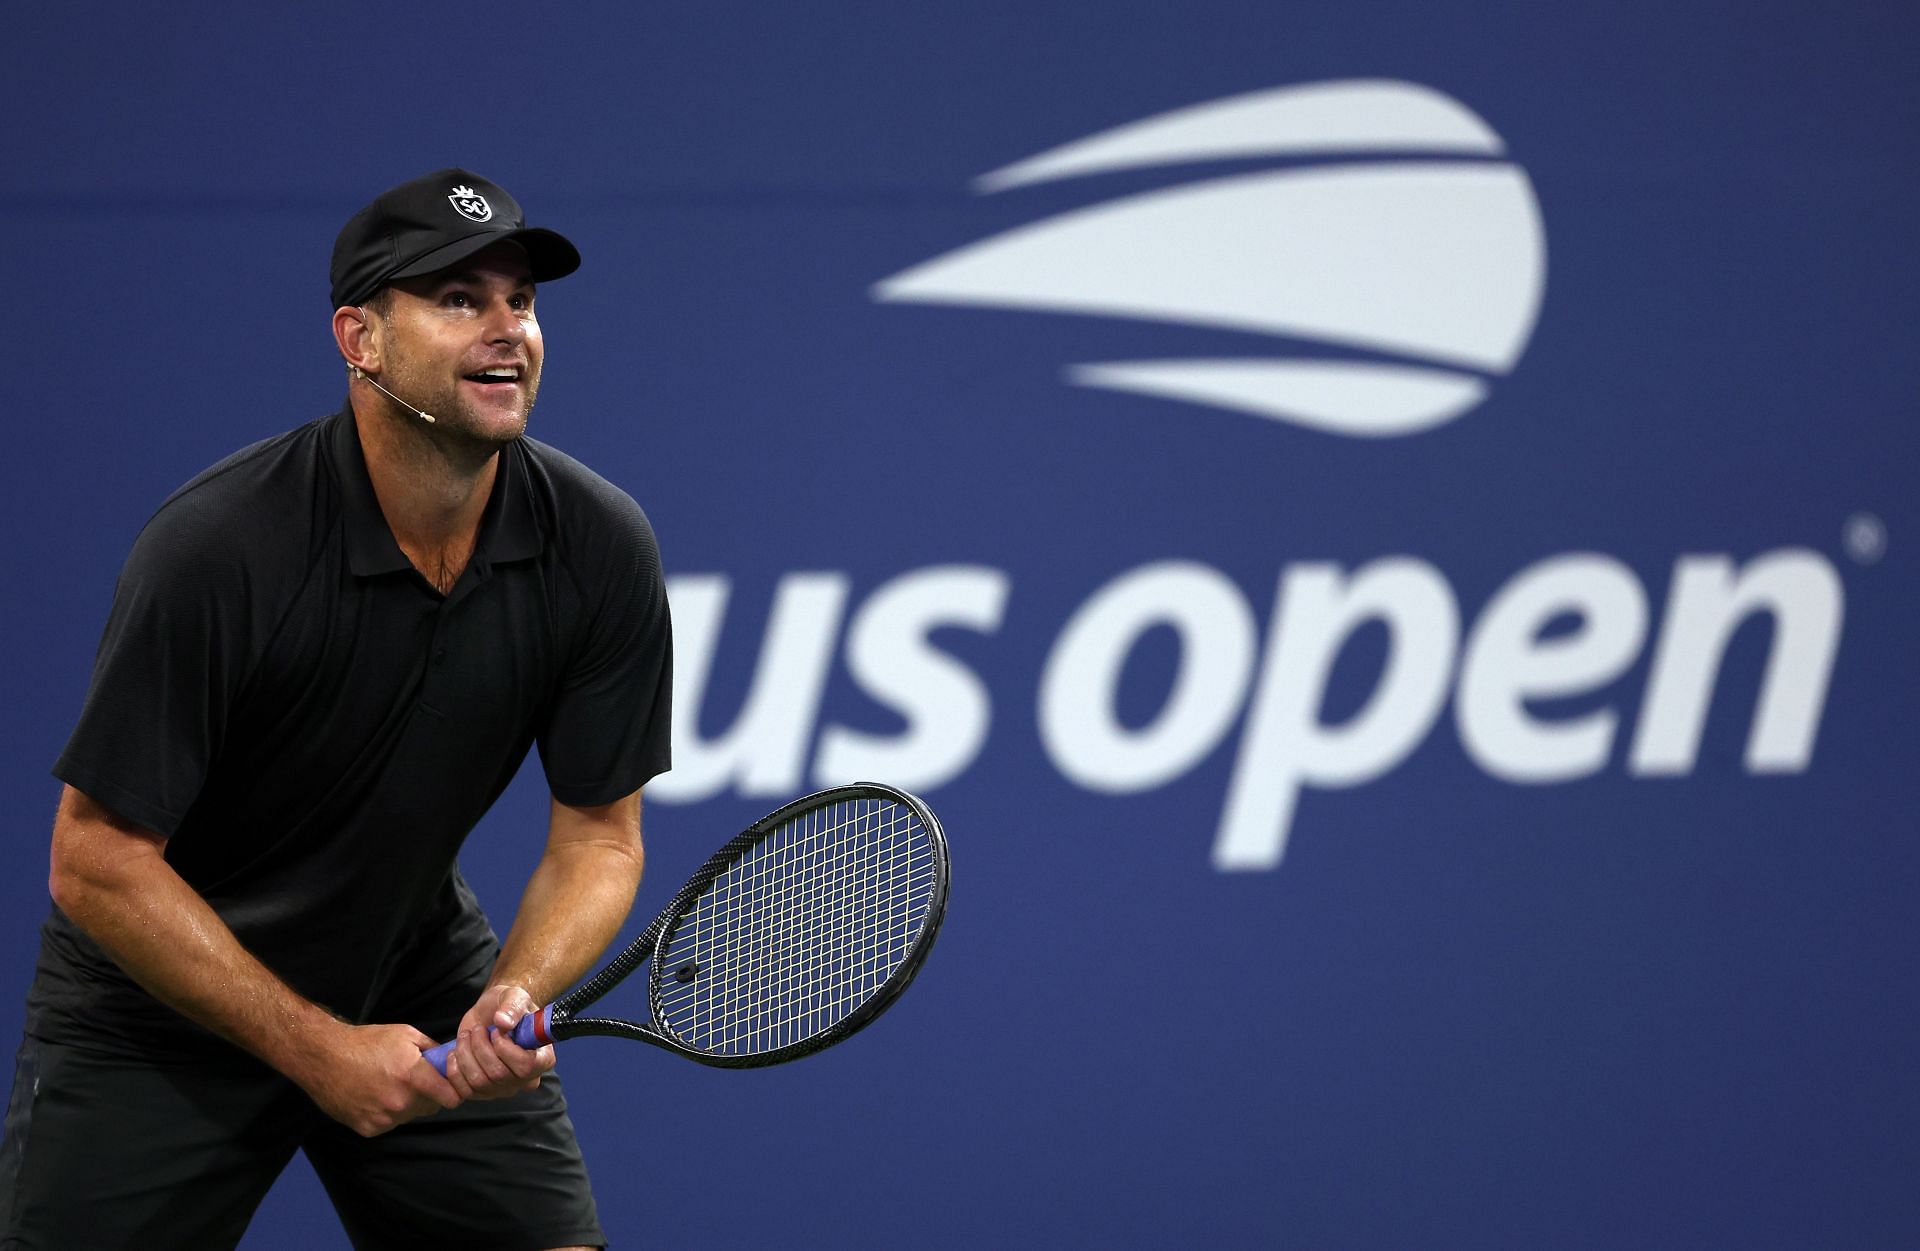 Andy Roddick in action during the 2022 US Open Legends Match.